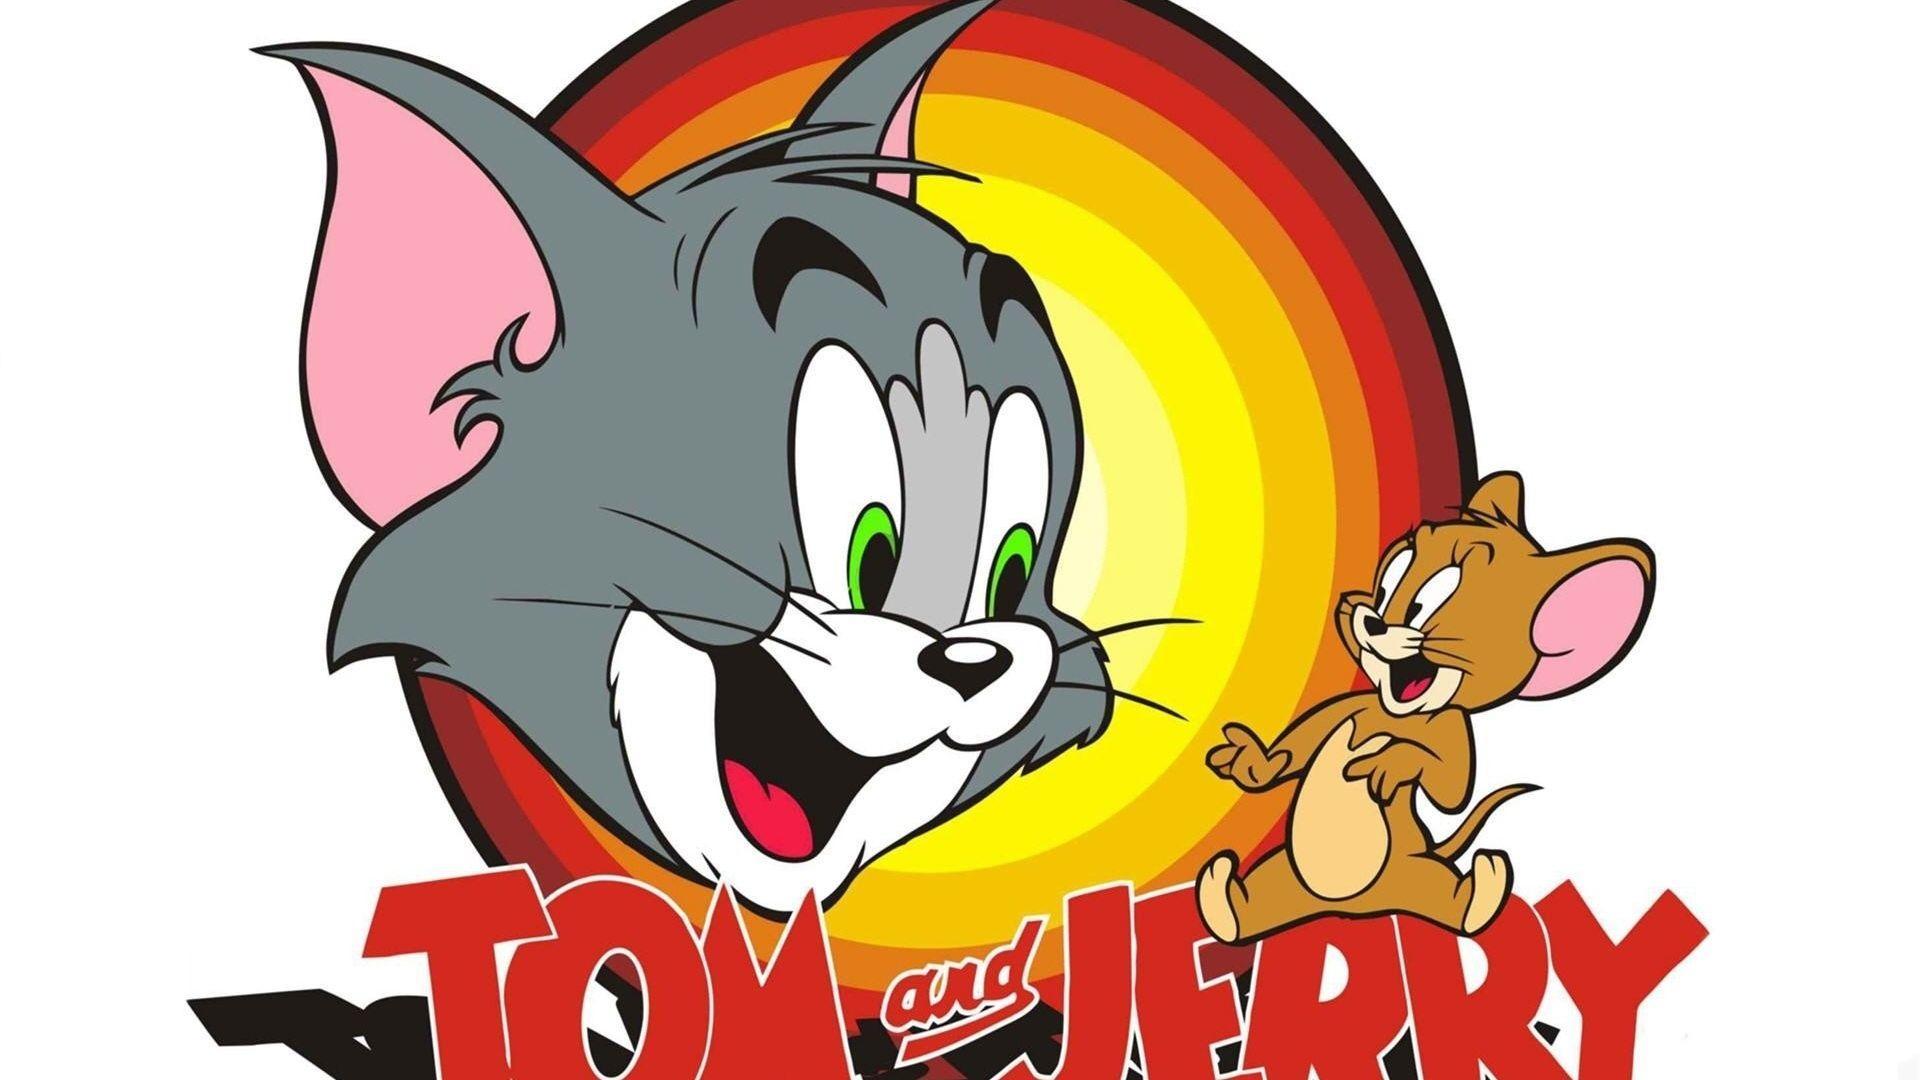 Full HD 1080p Tom and jerry Wallpapers HD, Desktop Backgrounds